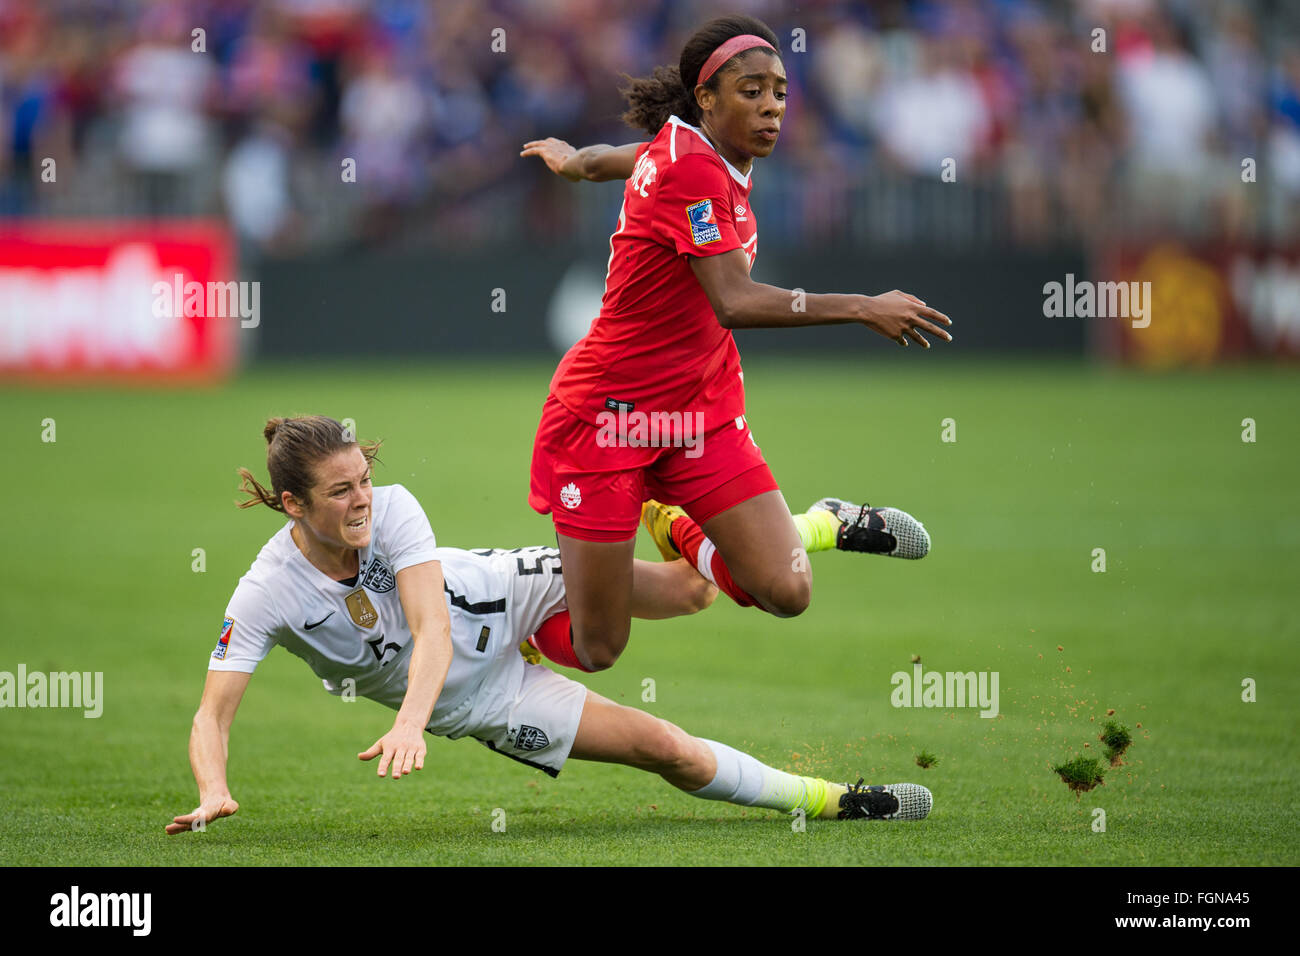 Houston, TX, USA. 21st Feb, 2016. United States defender Kelley O'Hara (5) and Canada midfielder Ashley Lawrence (10) get tangled up during the Final match of the CONCACAF Olympic Qualifying tournament between Canada and the USA at BBVA Compass Stadium in Houston, TX. USA won 2-0.Trask Smith/CSM/Alamy Live News Stock Photo